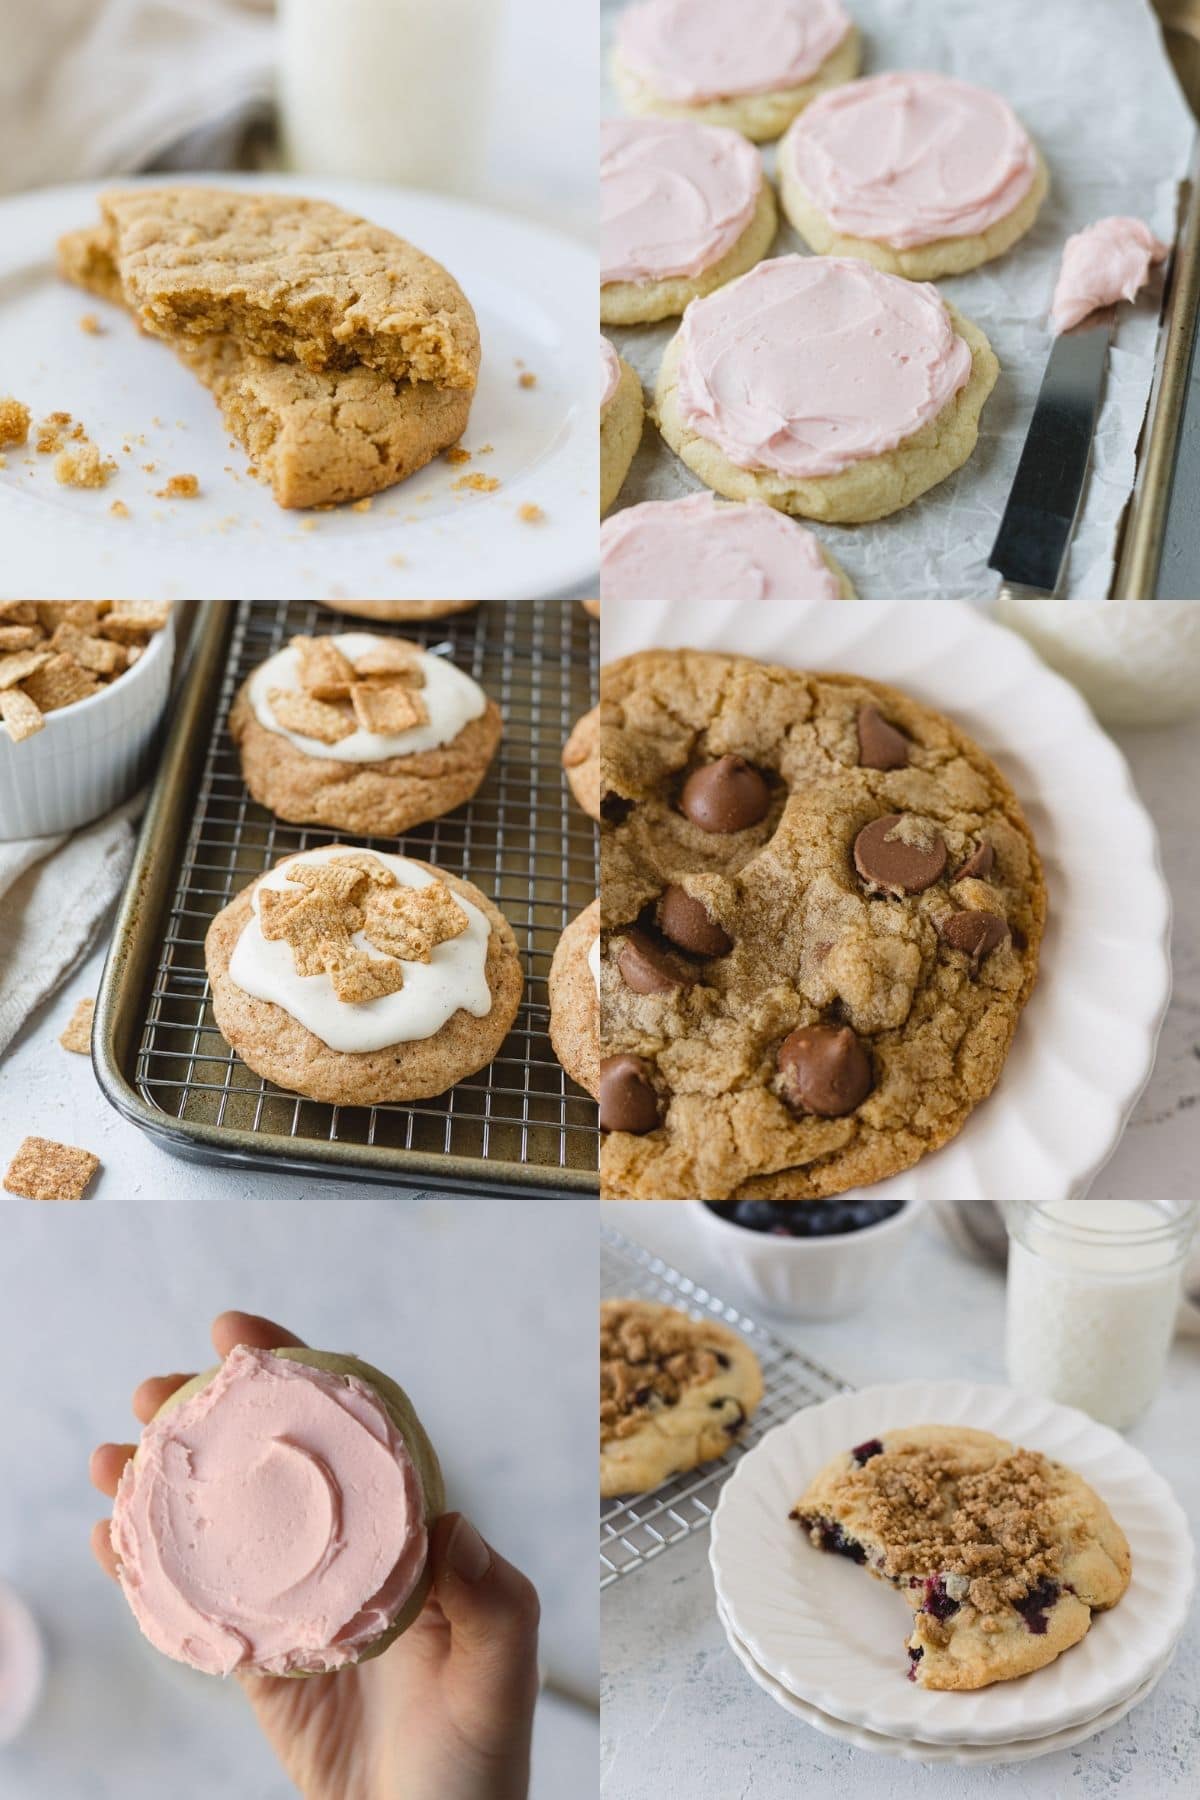 Crumbl Copycat Cookie Recipes To Bake at Home!